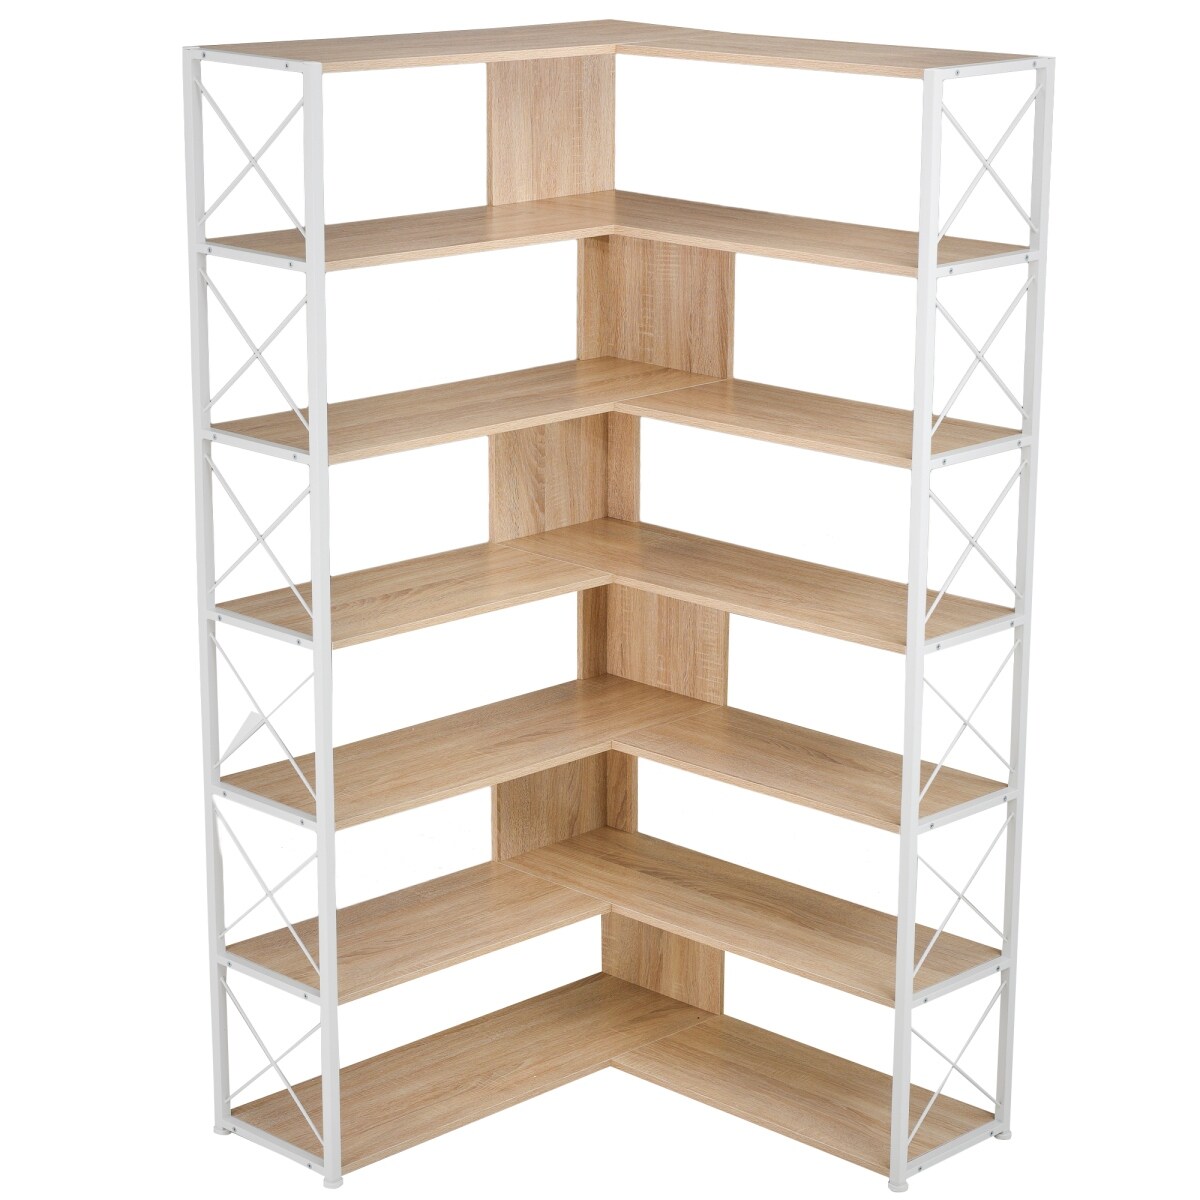 https://ak1.ostkcdn.com/images/products/is/images/direct/28aa31a42baeb0d4b2521ff8a18fe465c0f4a75c/7-Tier-Bookcase-Corner-Bookshelf%2C-L-Shaped-Plant-Stand-with-Metal-Frame%2C-Industrial-Style-Display-Shelf.jpg